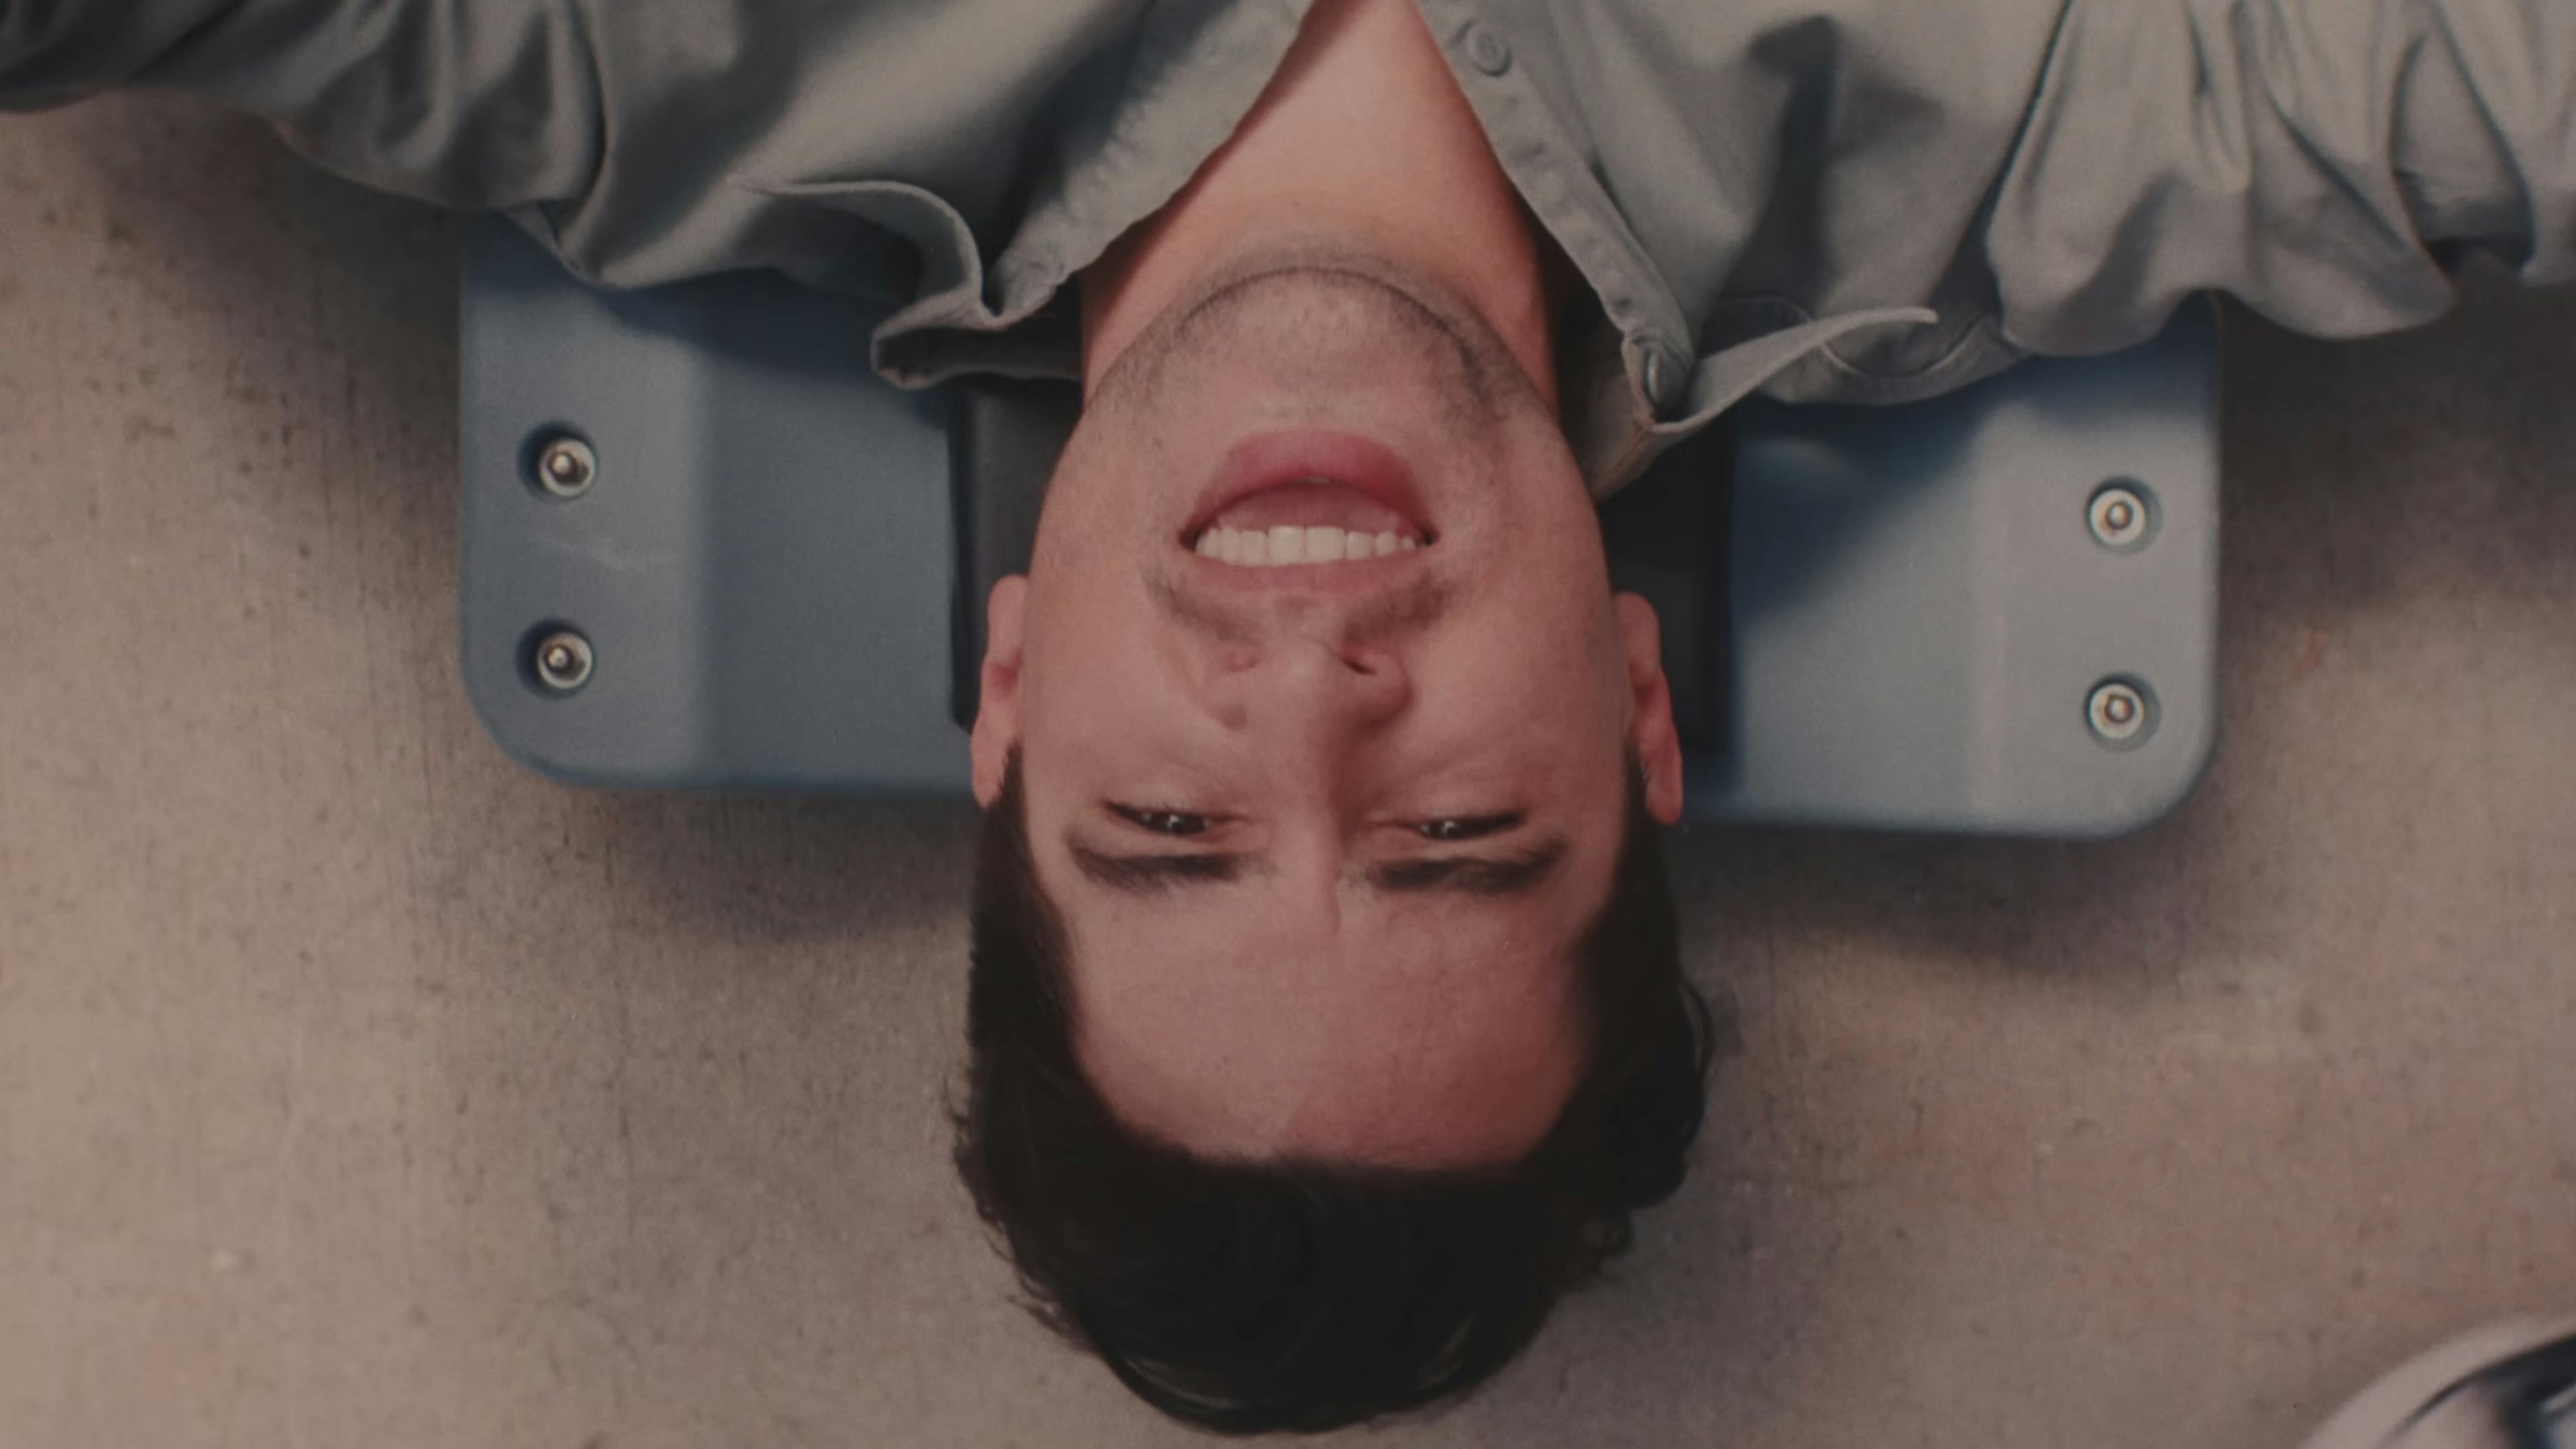 Watch the video for Panic! At The Disco’s new single Middle Of A Breakup